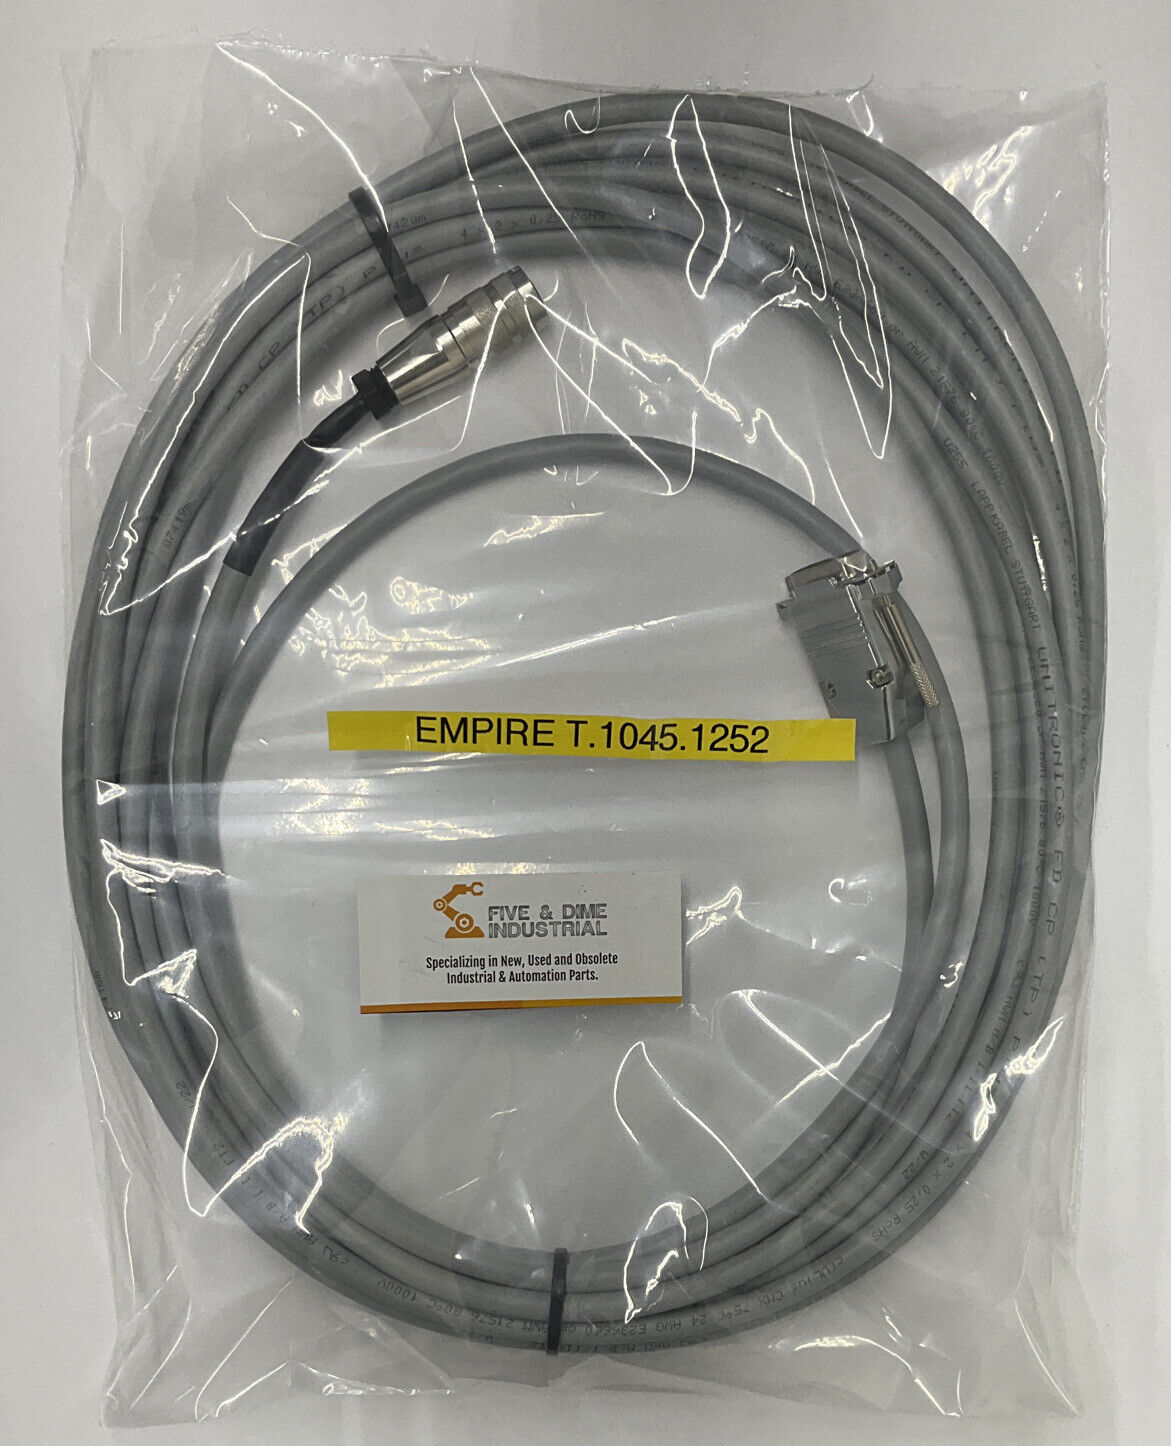 Empire Products T.1045.1252 Encoder Cable Assembly (CBL127)